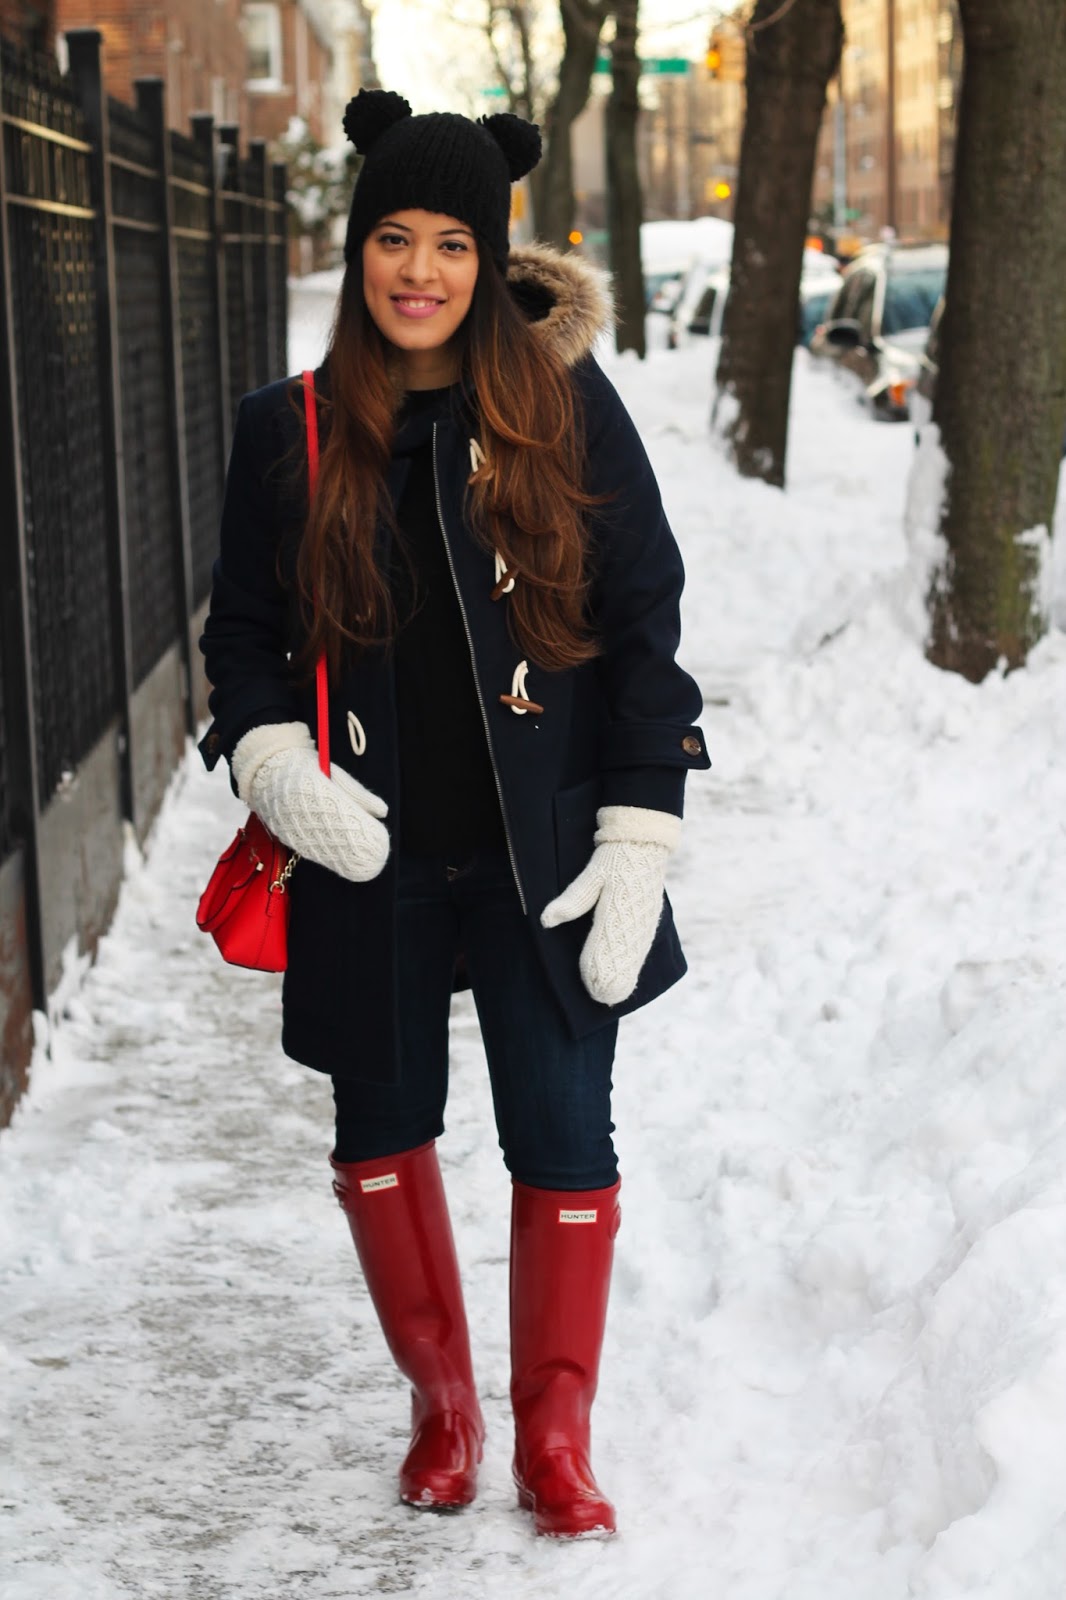 winter look, oldnavy, hunter rain boots, hunter, red gloss hunter rain boots, new york, winter, winter style, navy toggle coat, kate spade, pom pom hat, fashion blogger, fashion, style, ootd, outfit of the day, rain boots, red, mittens, prima donna, banana republic, express, jeans, dark wash jeans, latina blogger, nyc blogger, snow, black sweater